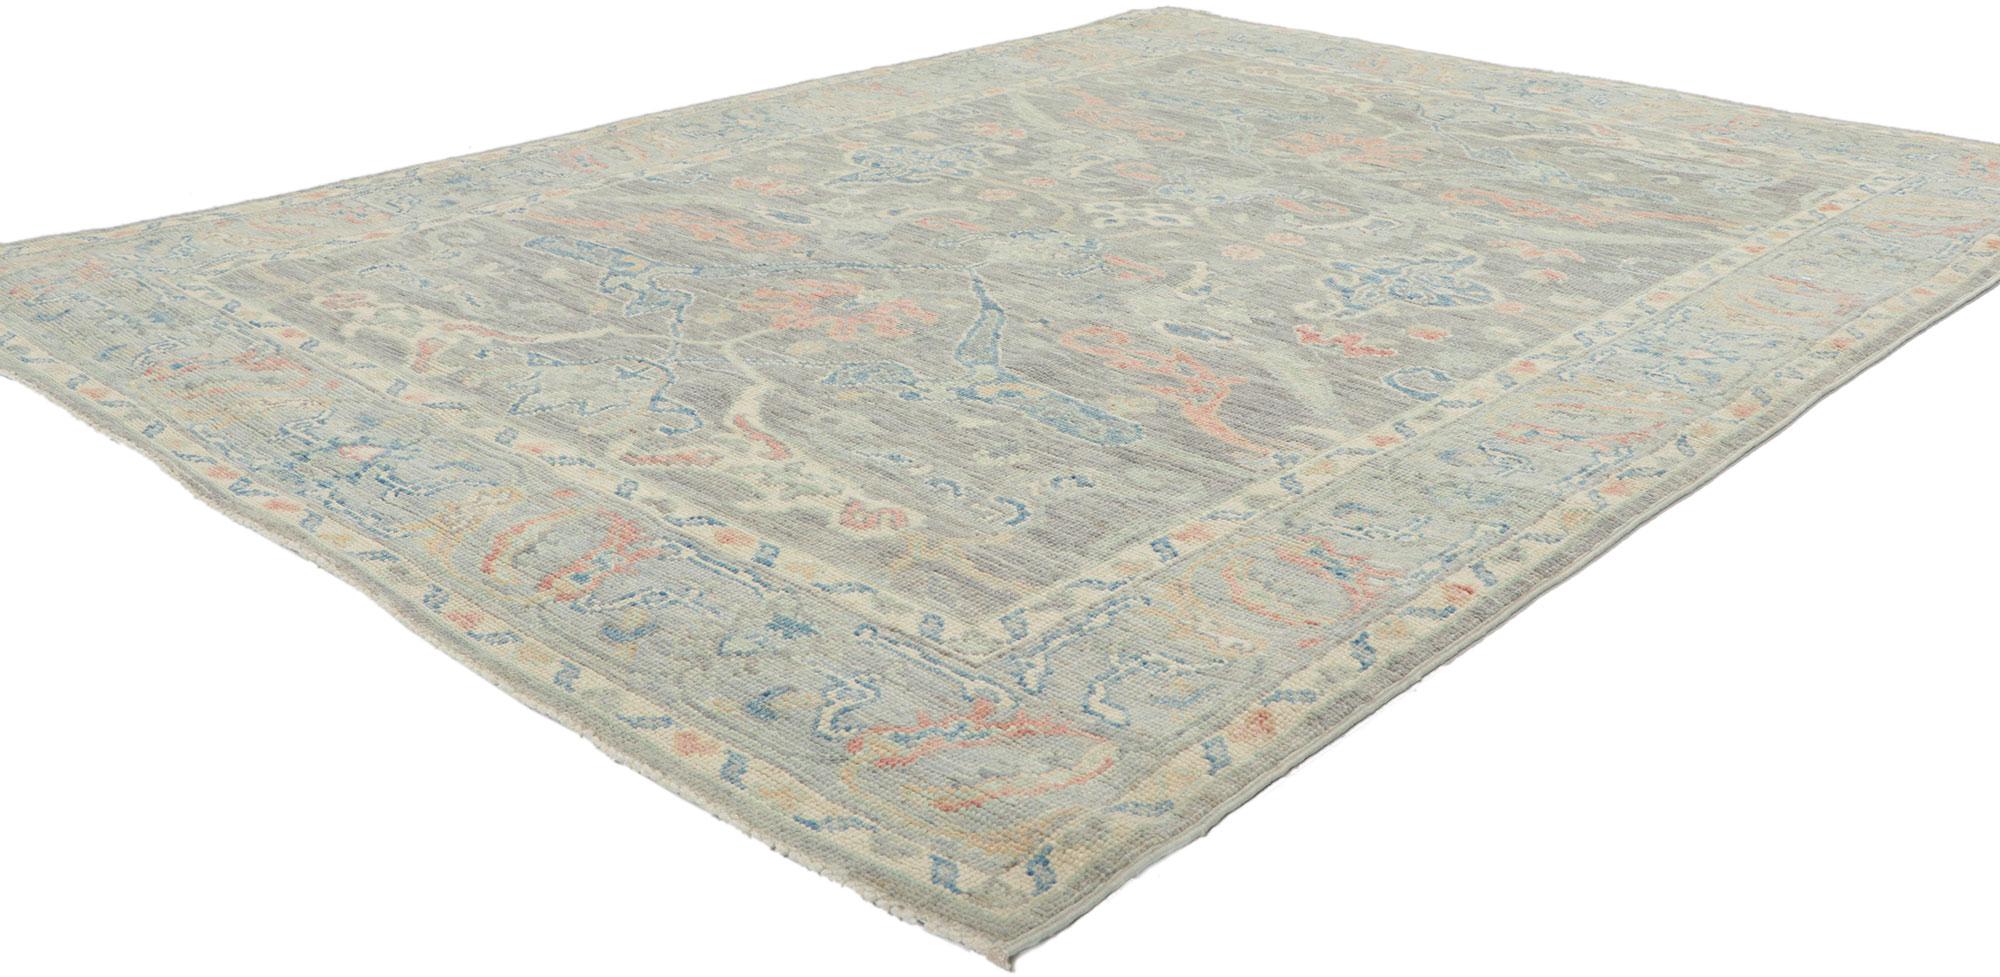 80885 new modern style oushak rug with soft colors, 05'01 x 06'11. Polished and playful, this hand-knotted wool contemporary Contemporary Oushak rug beautifully embodies a modern style. The composition features an all-over botanical pattern composed